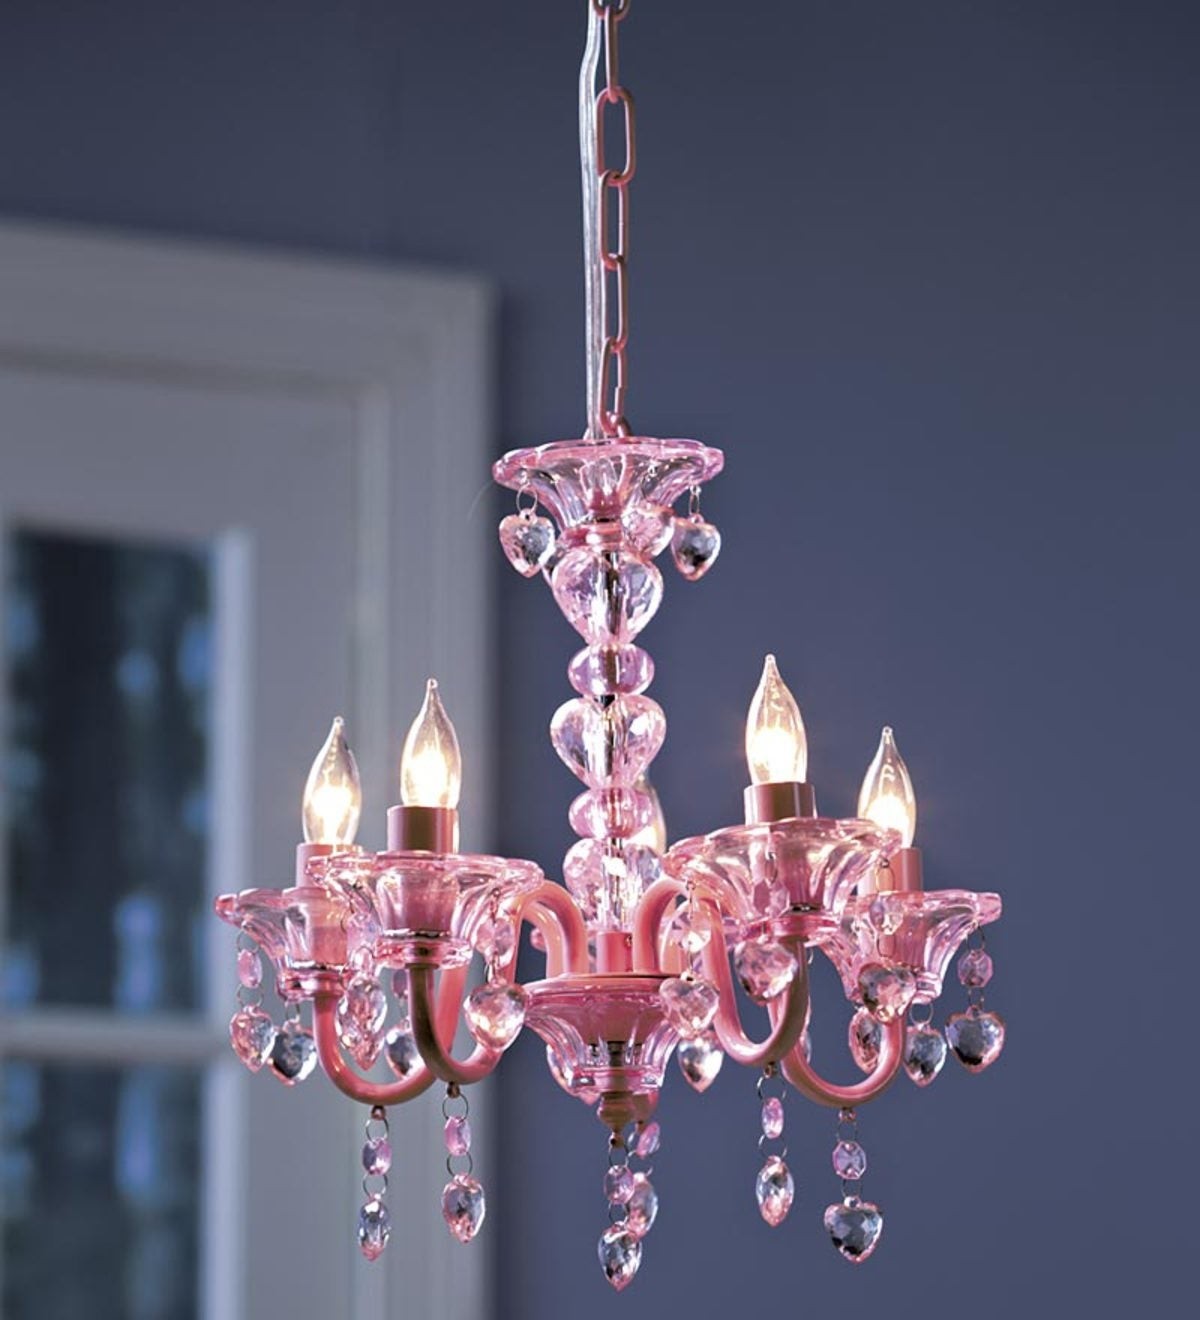 HearthSong "Crystal" Hearts Chandelier for Kids' Rooms, in Pink